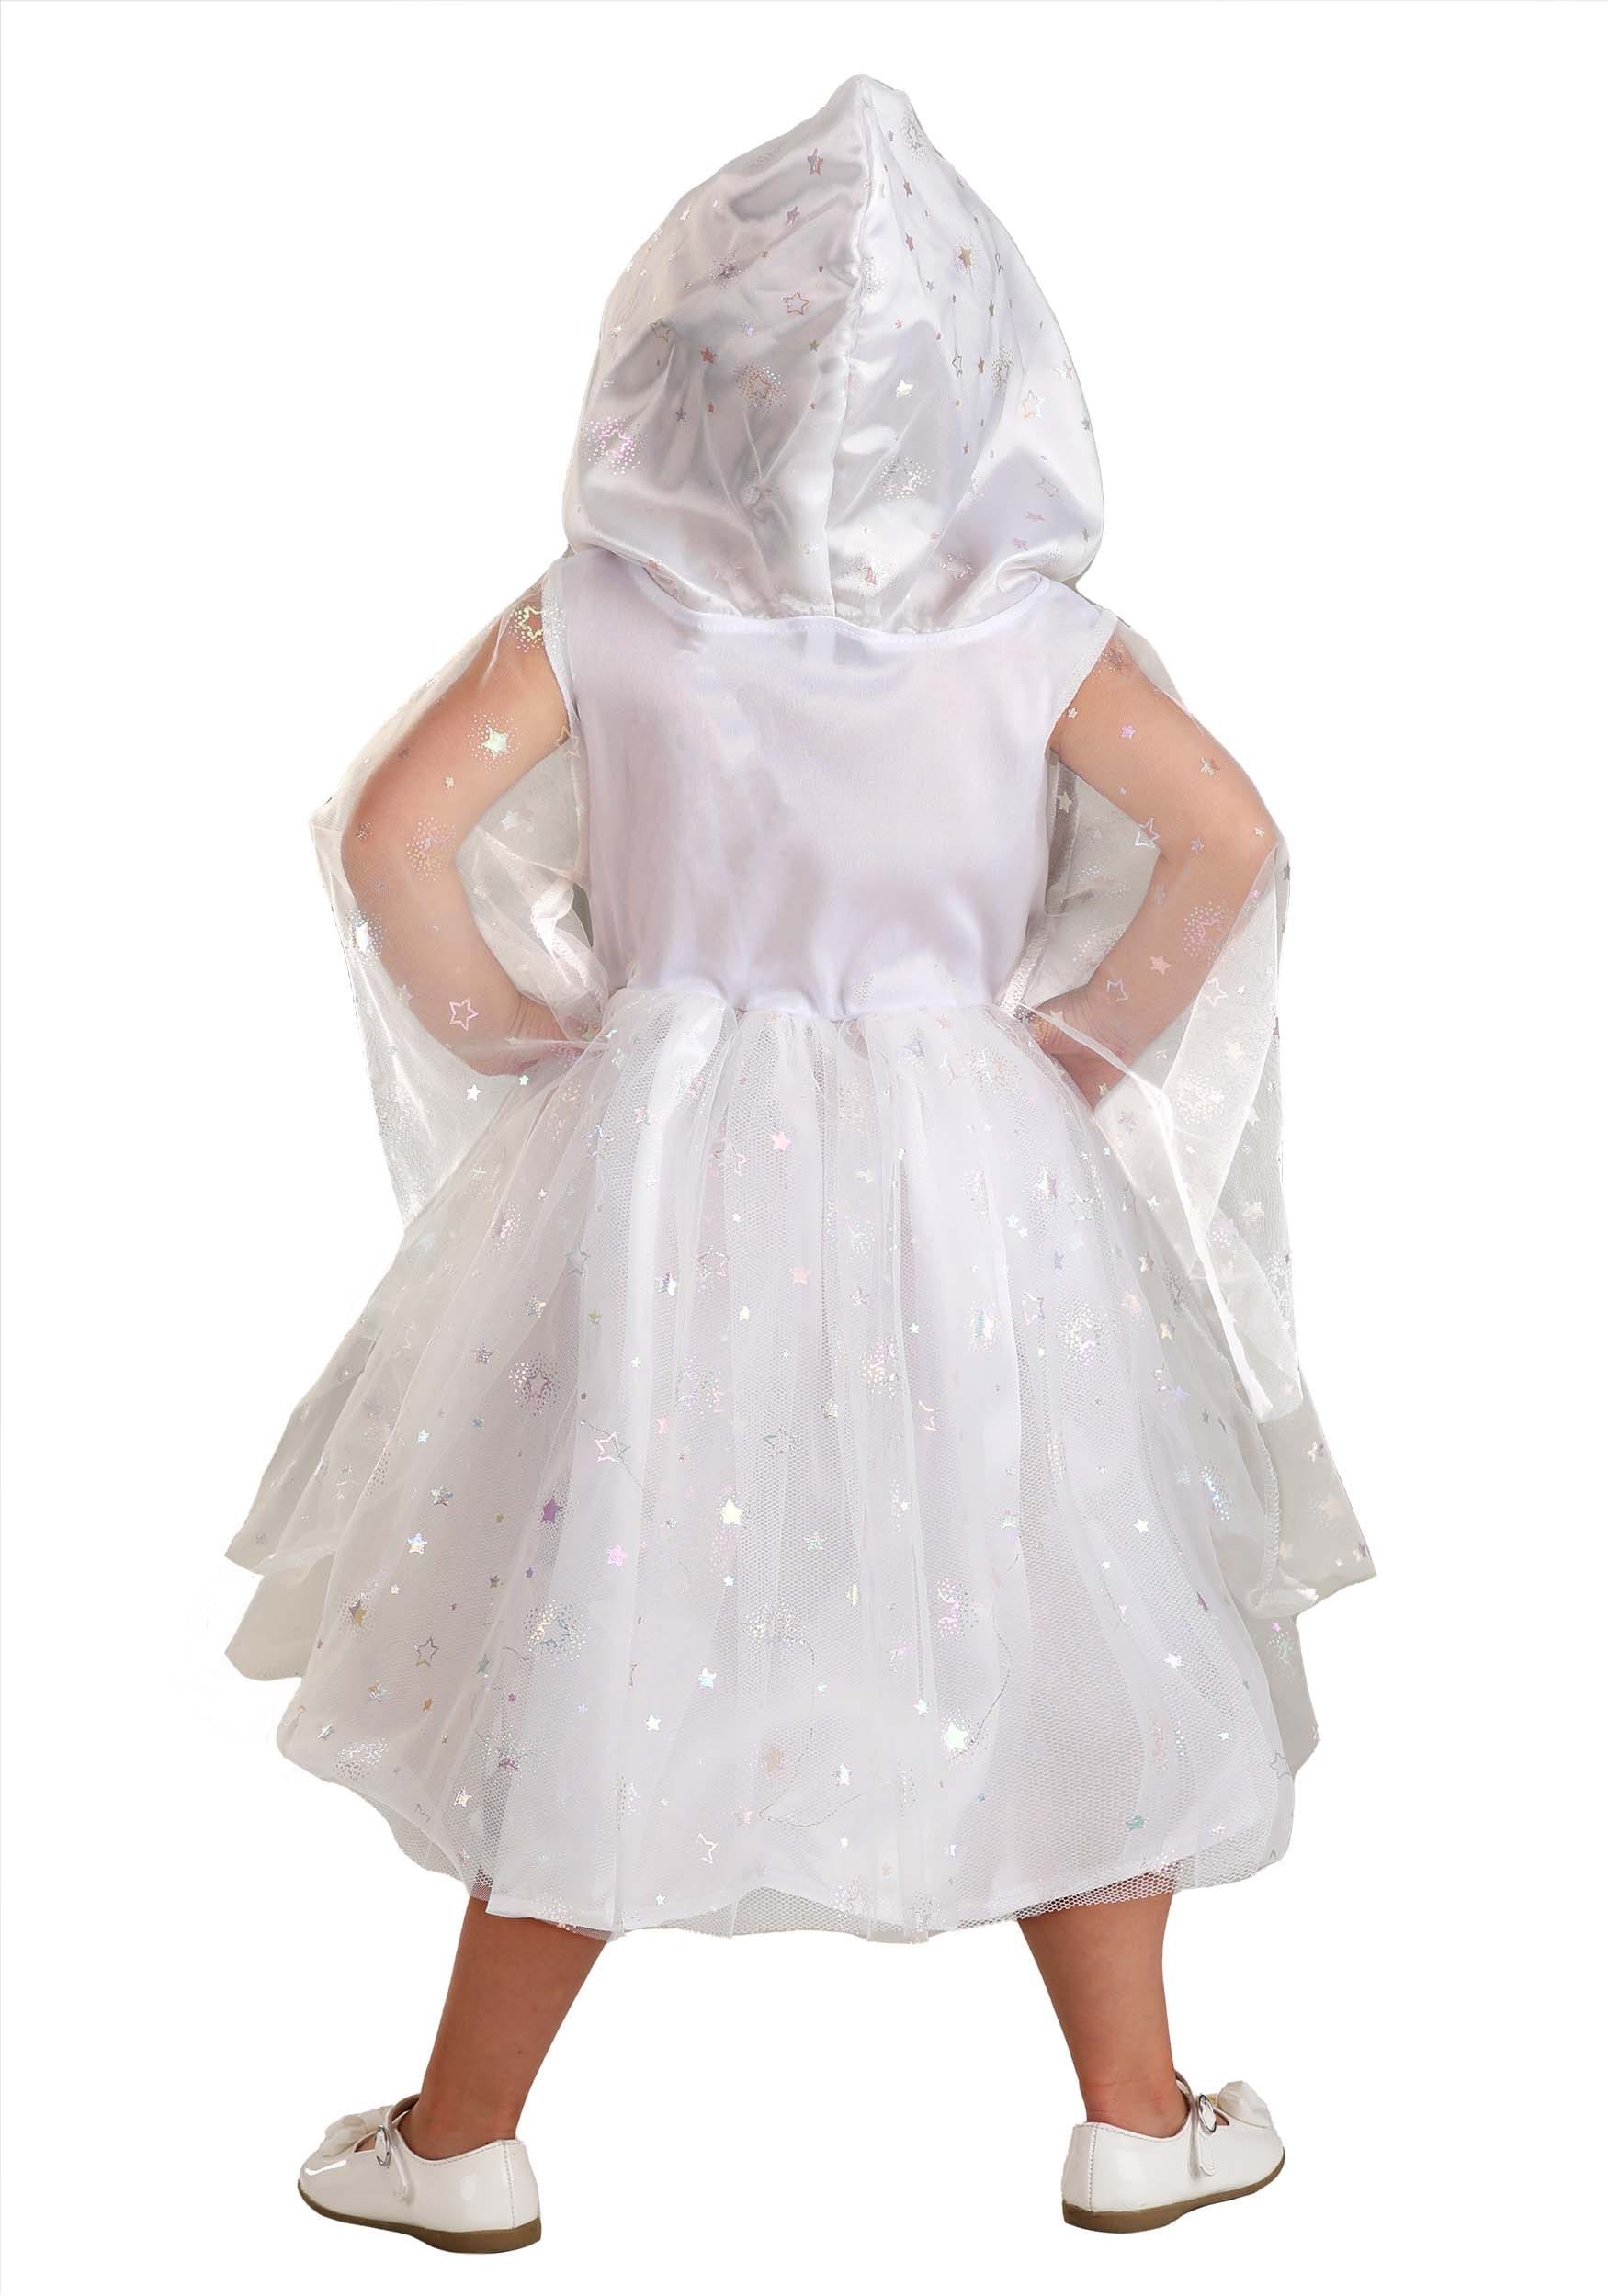 Light Up Ghost Toddler Costume